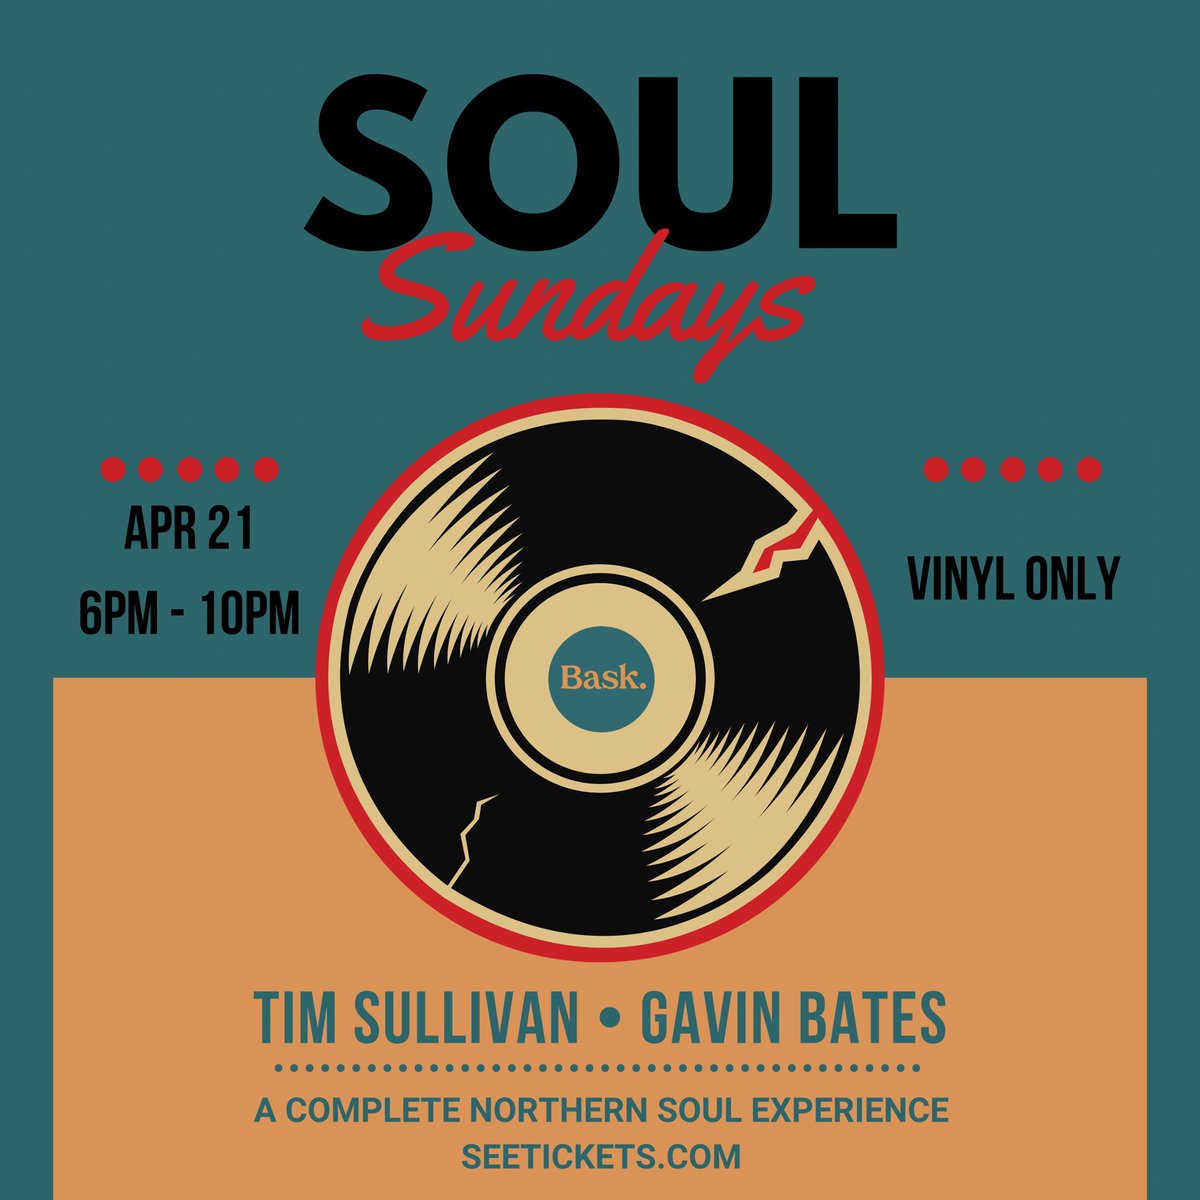 One of the highlights of the party scene at Bask is our Northern Soul bash, Soul Sundays. Vinyl only set from Tim Sullivan & Gavin Bates. Tickets > seetickets.com/event/soul-sun…